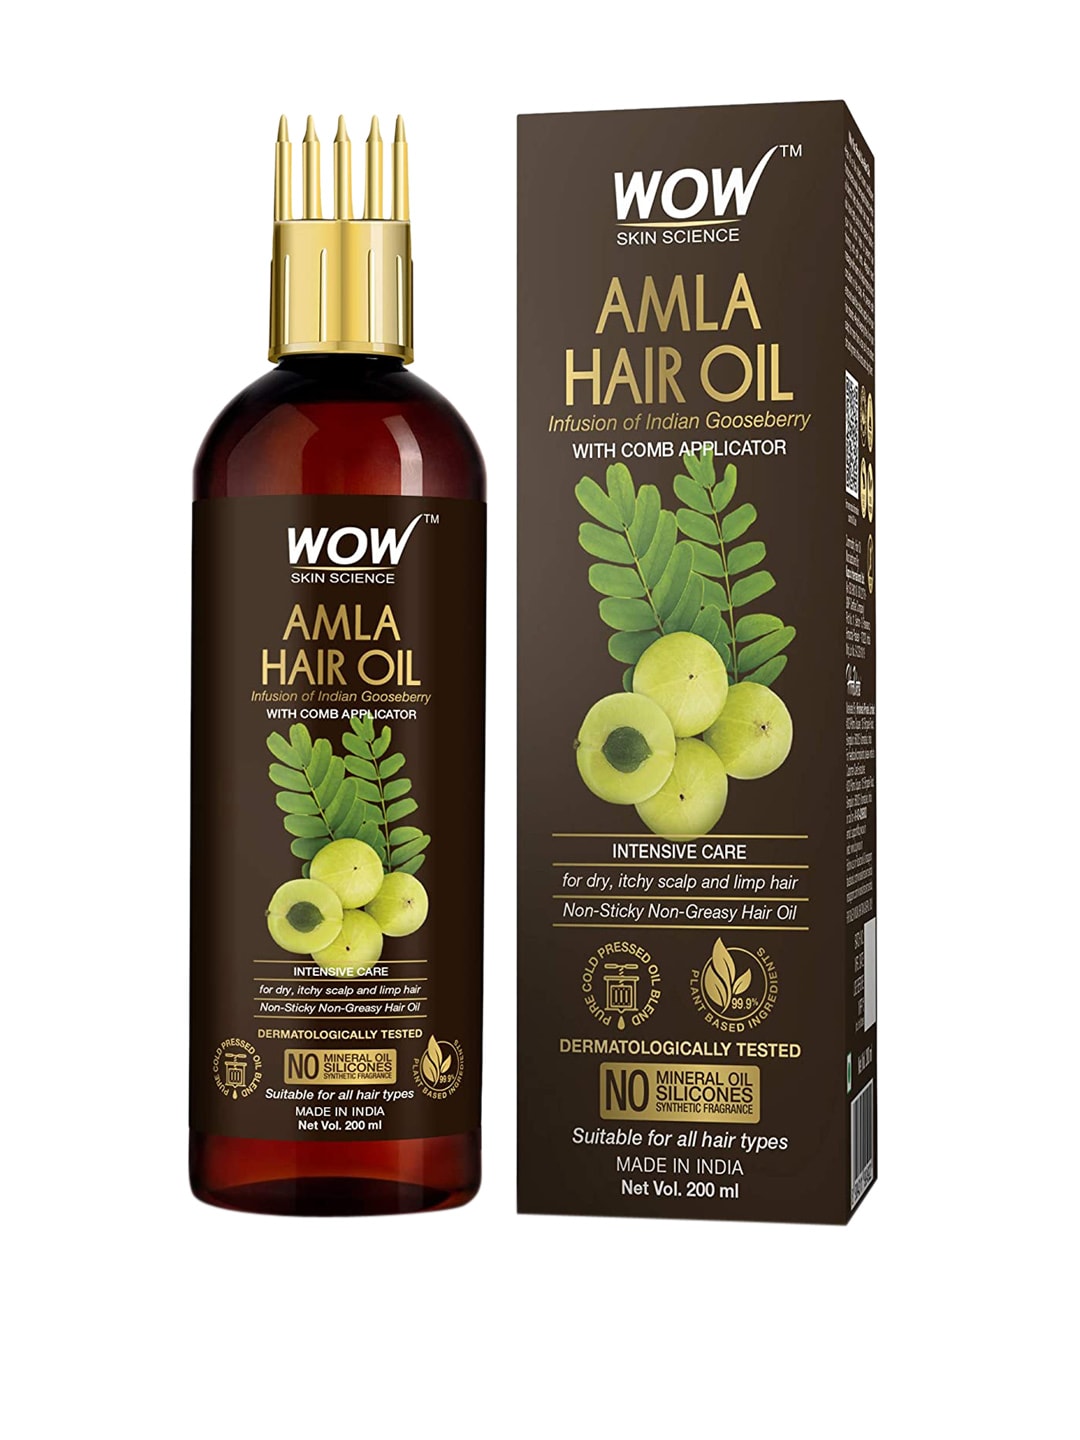 WOW SKIN SCIENCE Amla Hair Oil with Comb Applicator-200ml Price in India